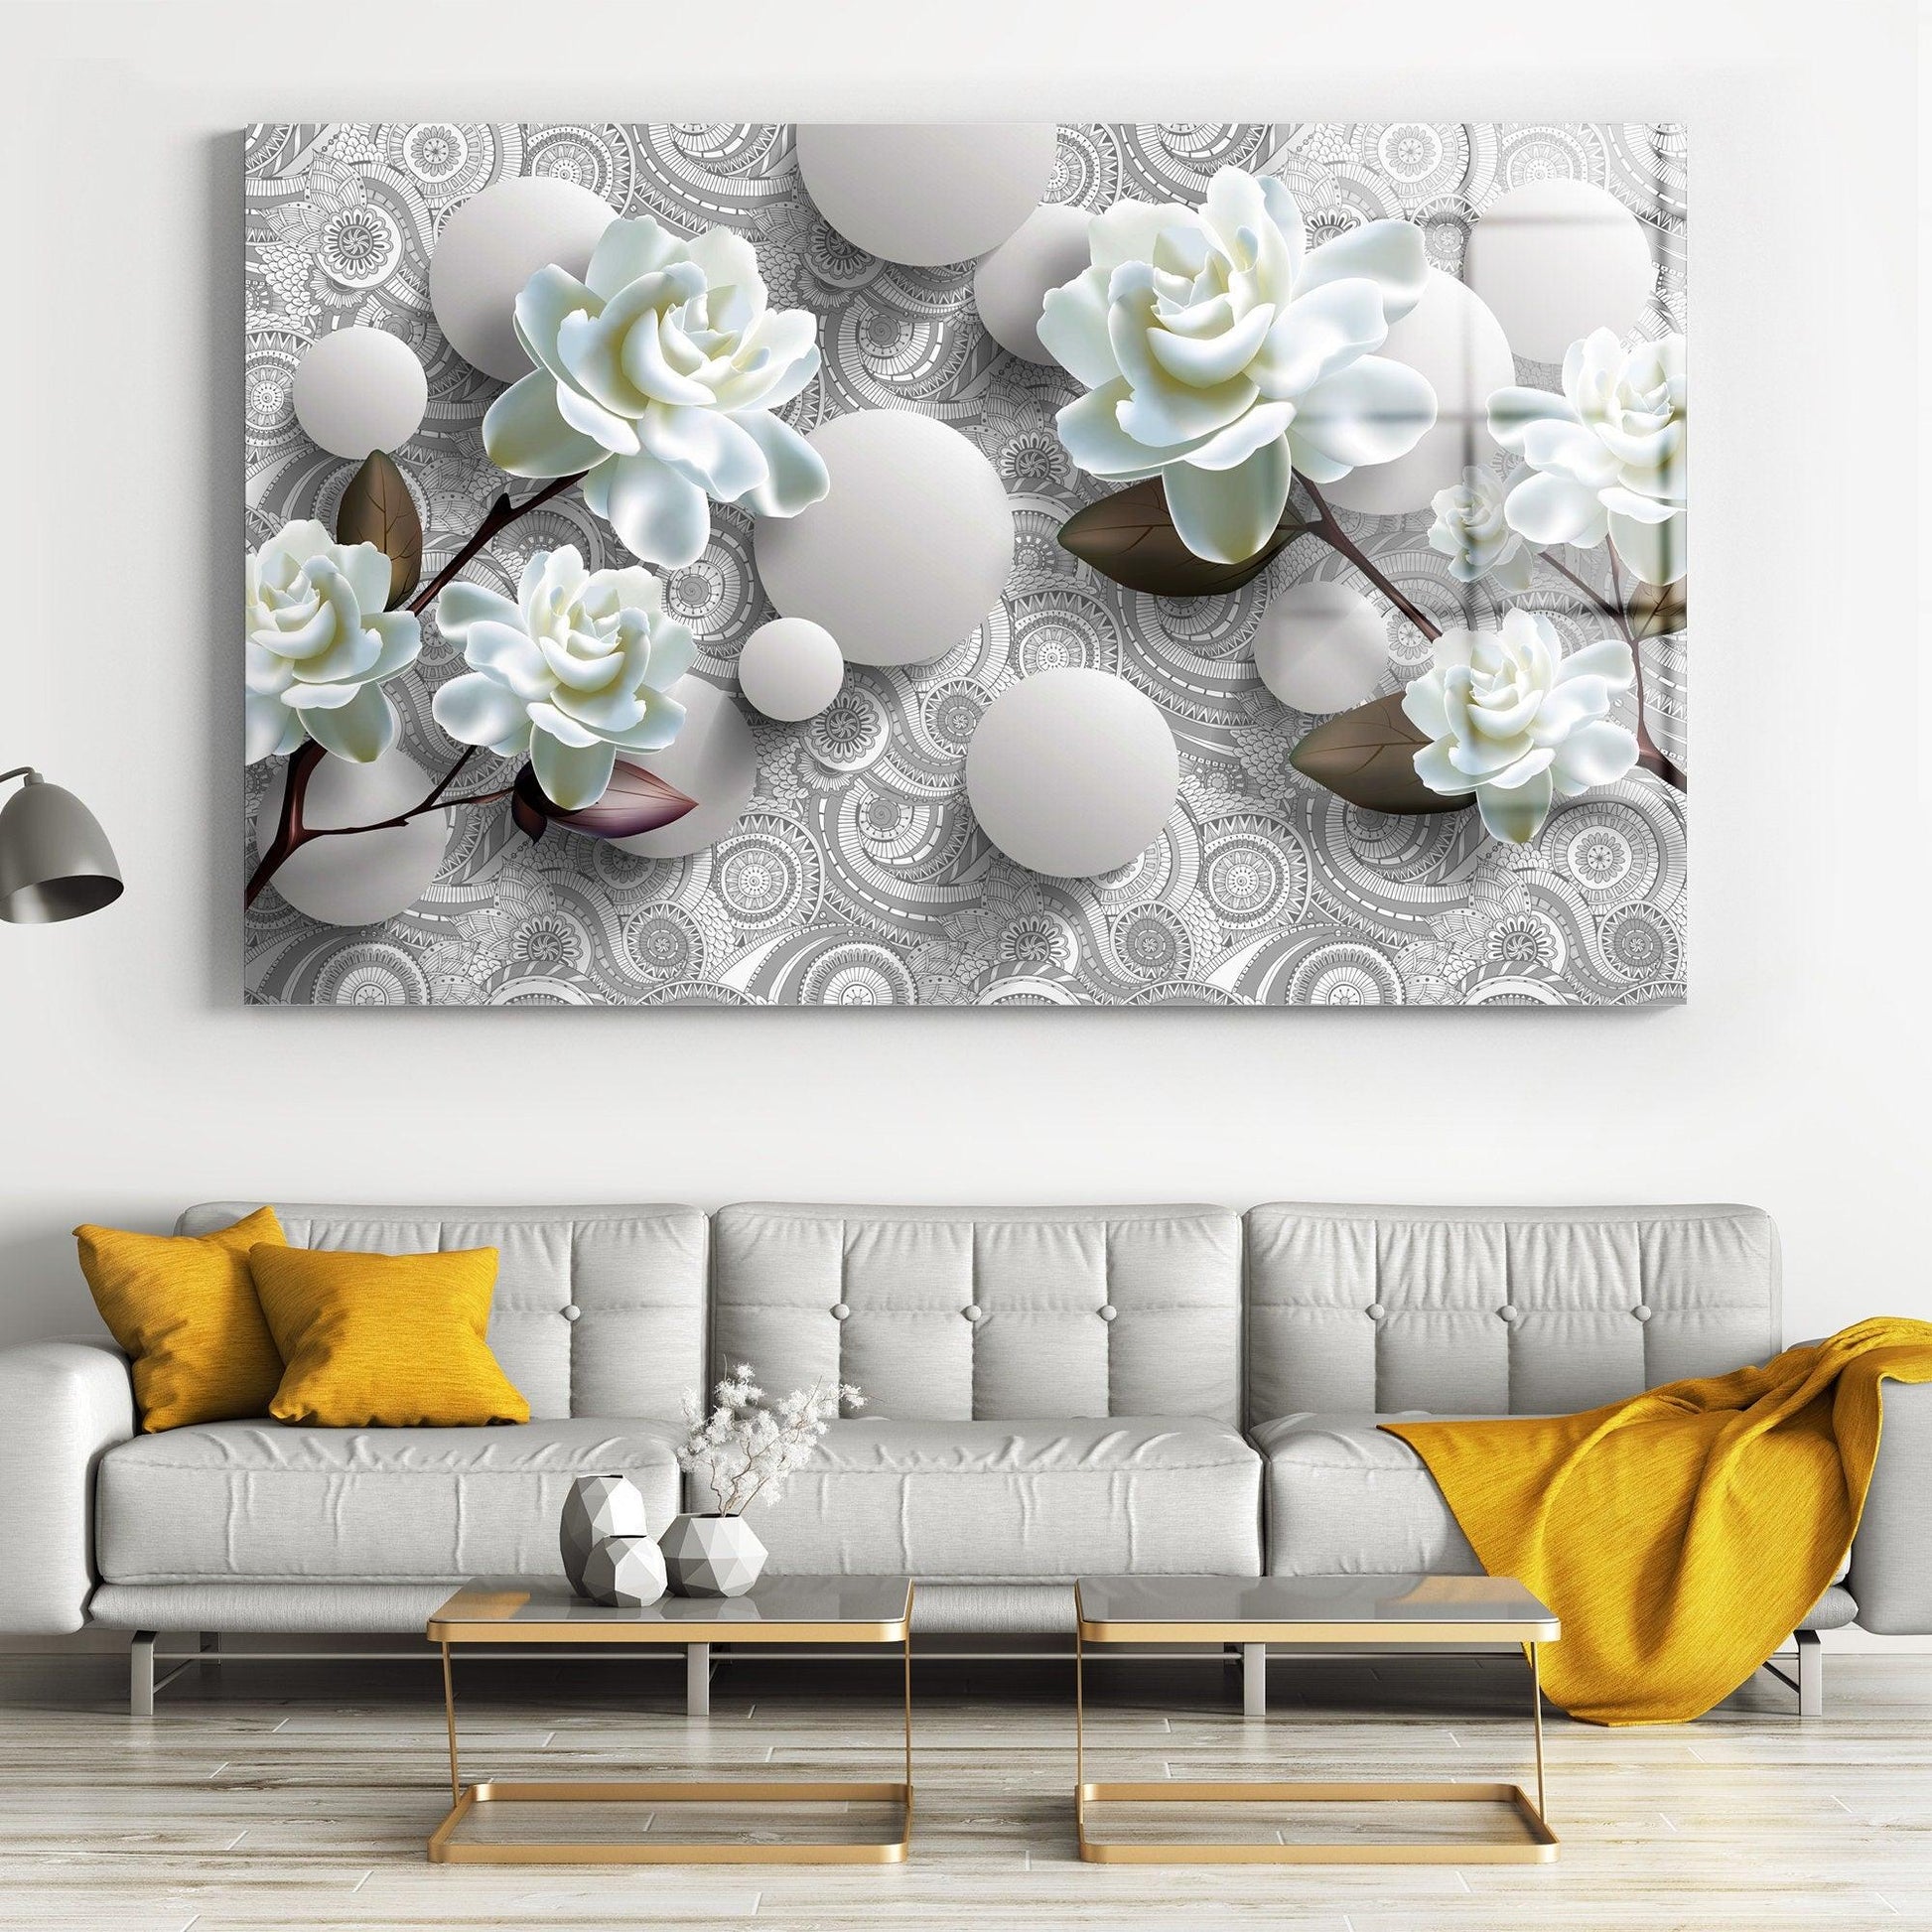 3D White flower Canvas Wall Art, Flowers Wall Hangings, White Canvas Wall Print, Black White Room Decor, Ready to Hang